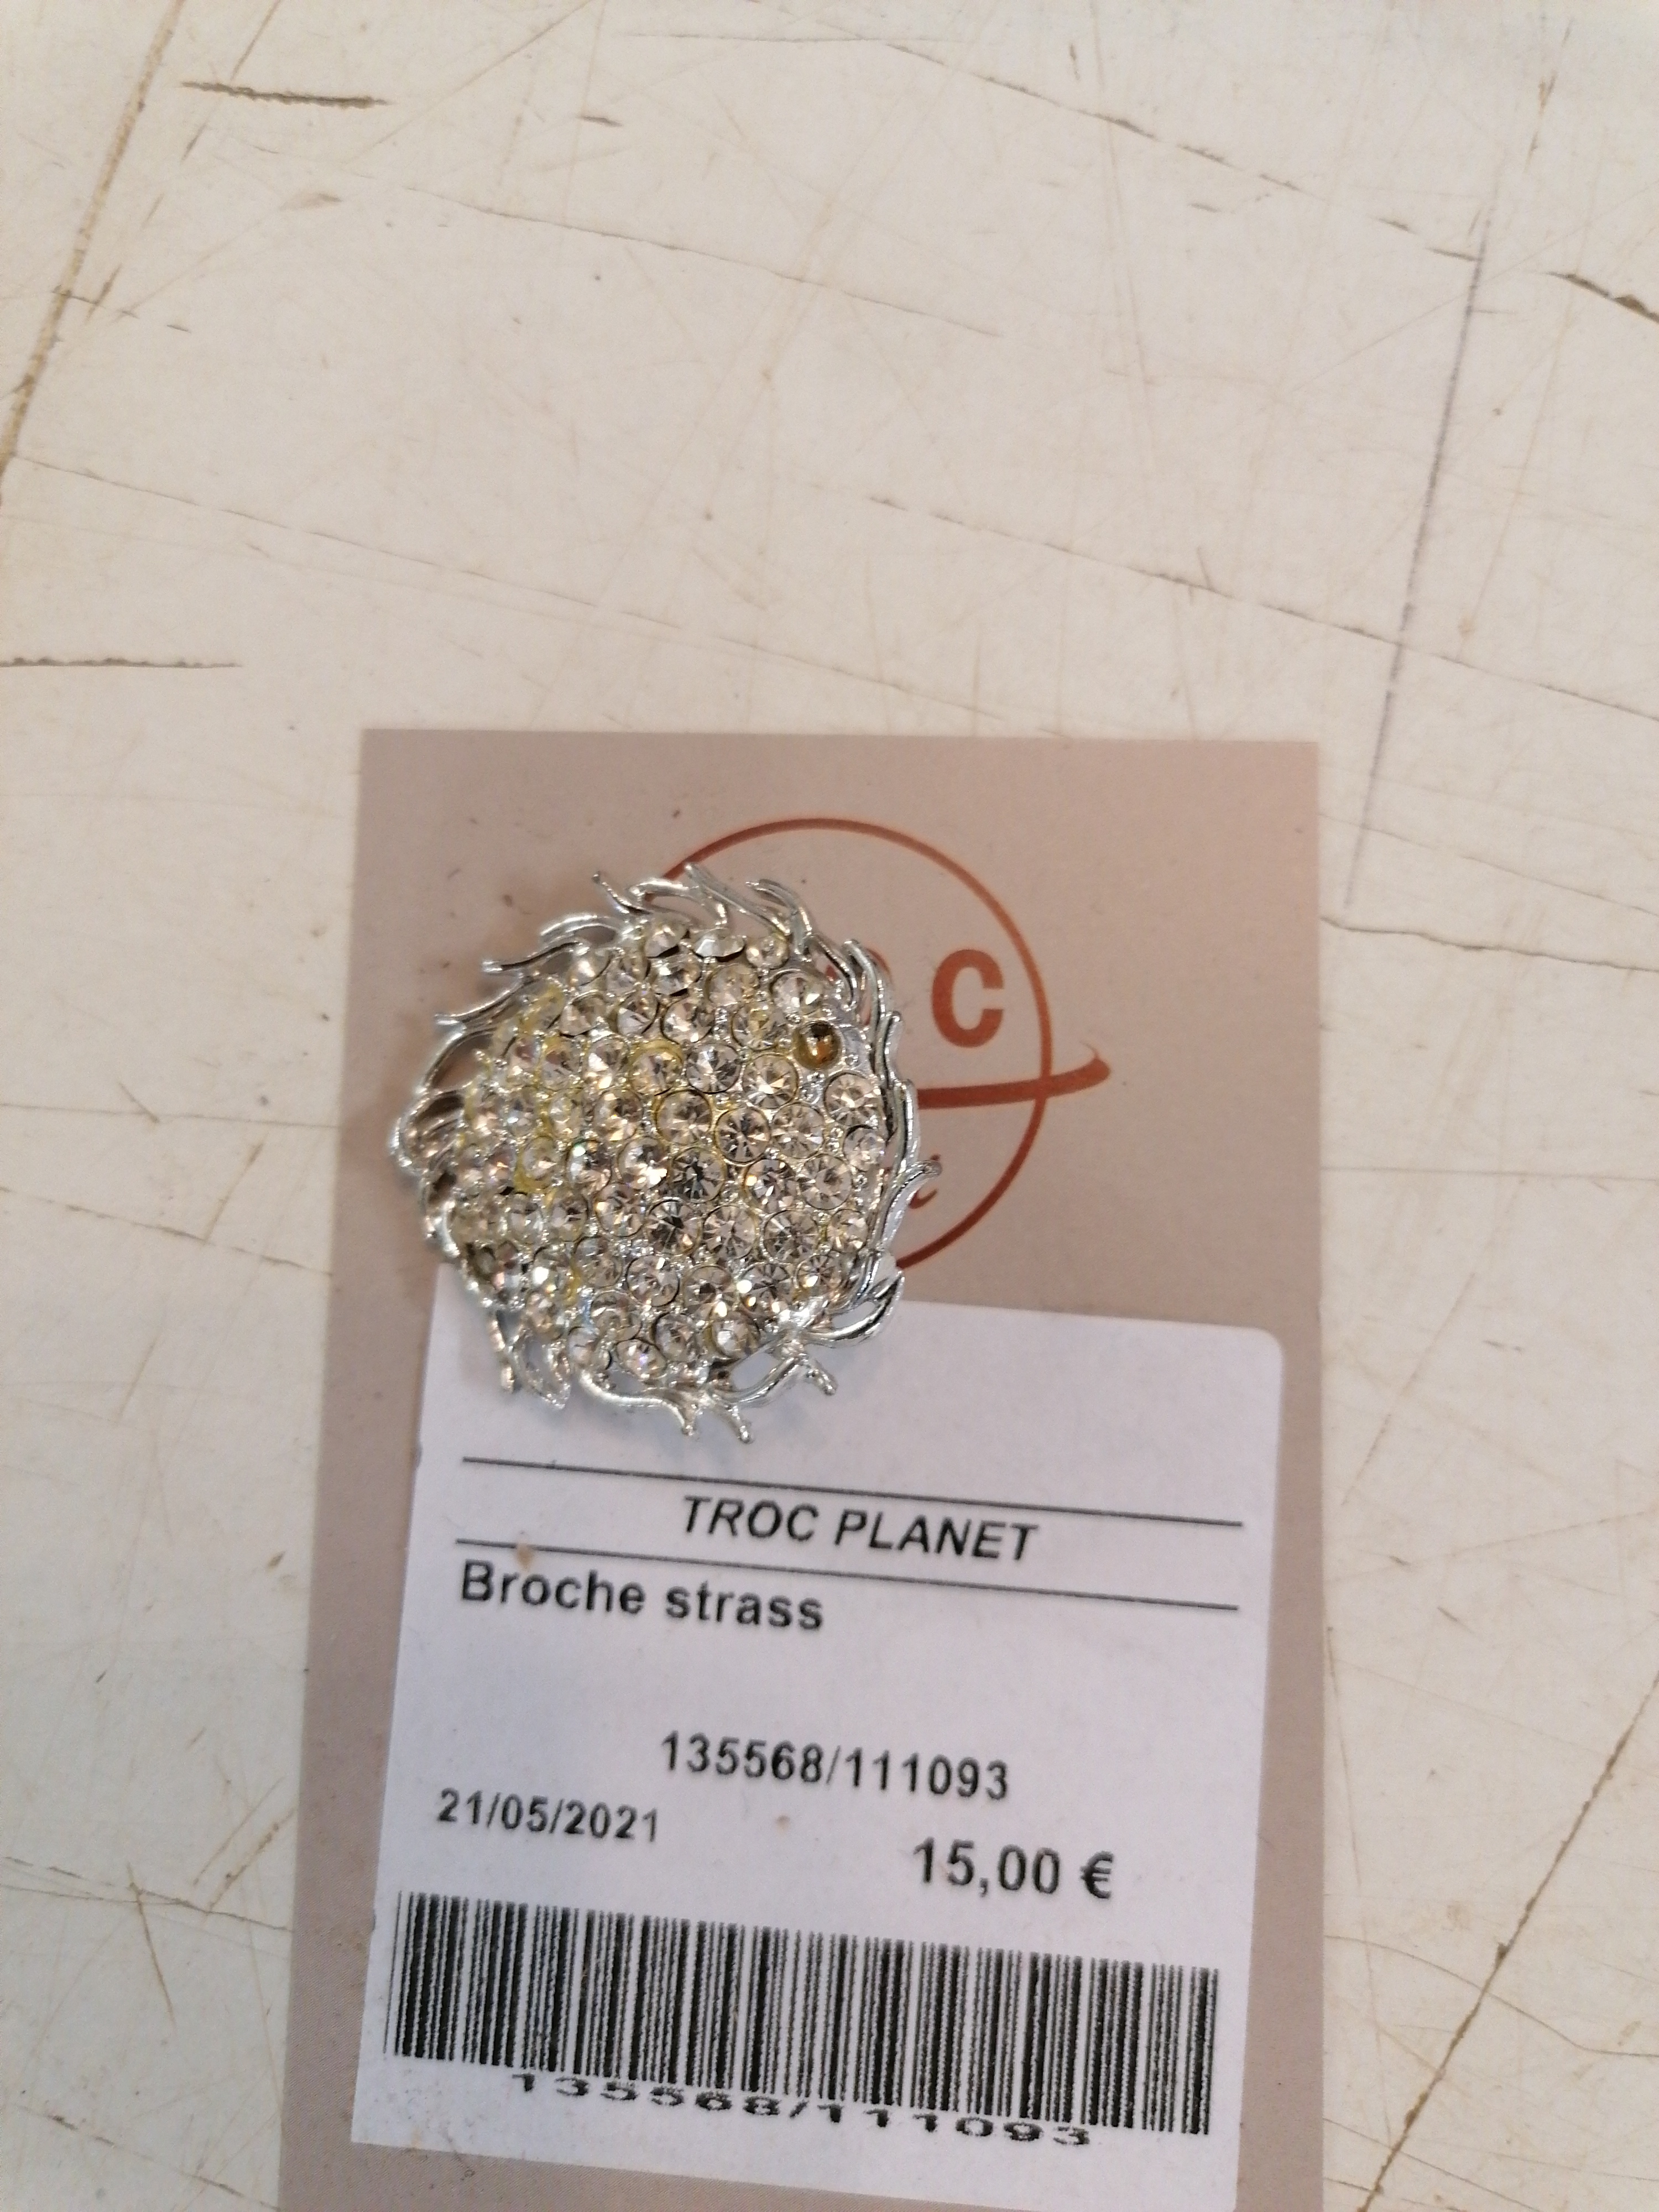 <p>Broche strass <br />9,00 € T.T.C<br /><a href="/Article/111093?type=depose" style="color:white;" target="_blank">Lien vers l&#39;article</a></p>